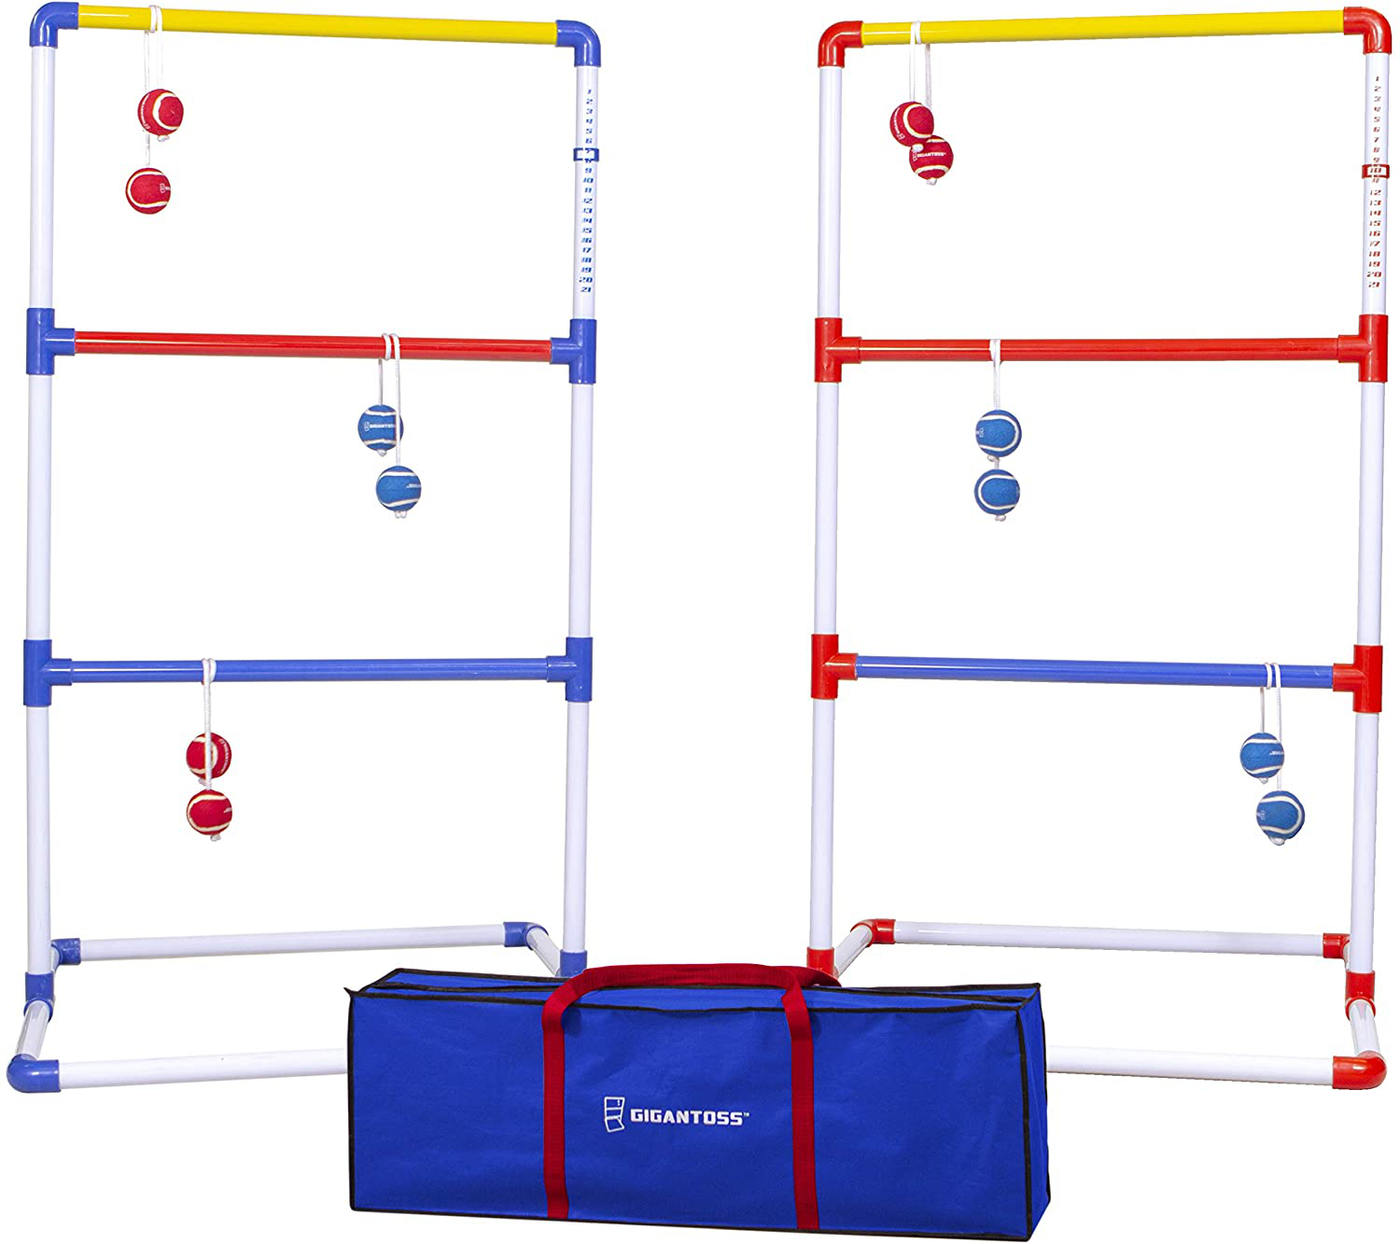 GoSports Premium Ladder Toss Outdoor Game Set with 6 Bolo Balls, Travel Carrying Case and Score Trackers - Choose Between Standard and Giant Size Sets